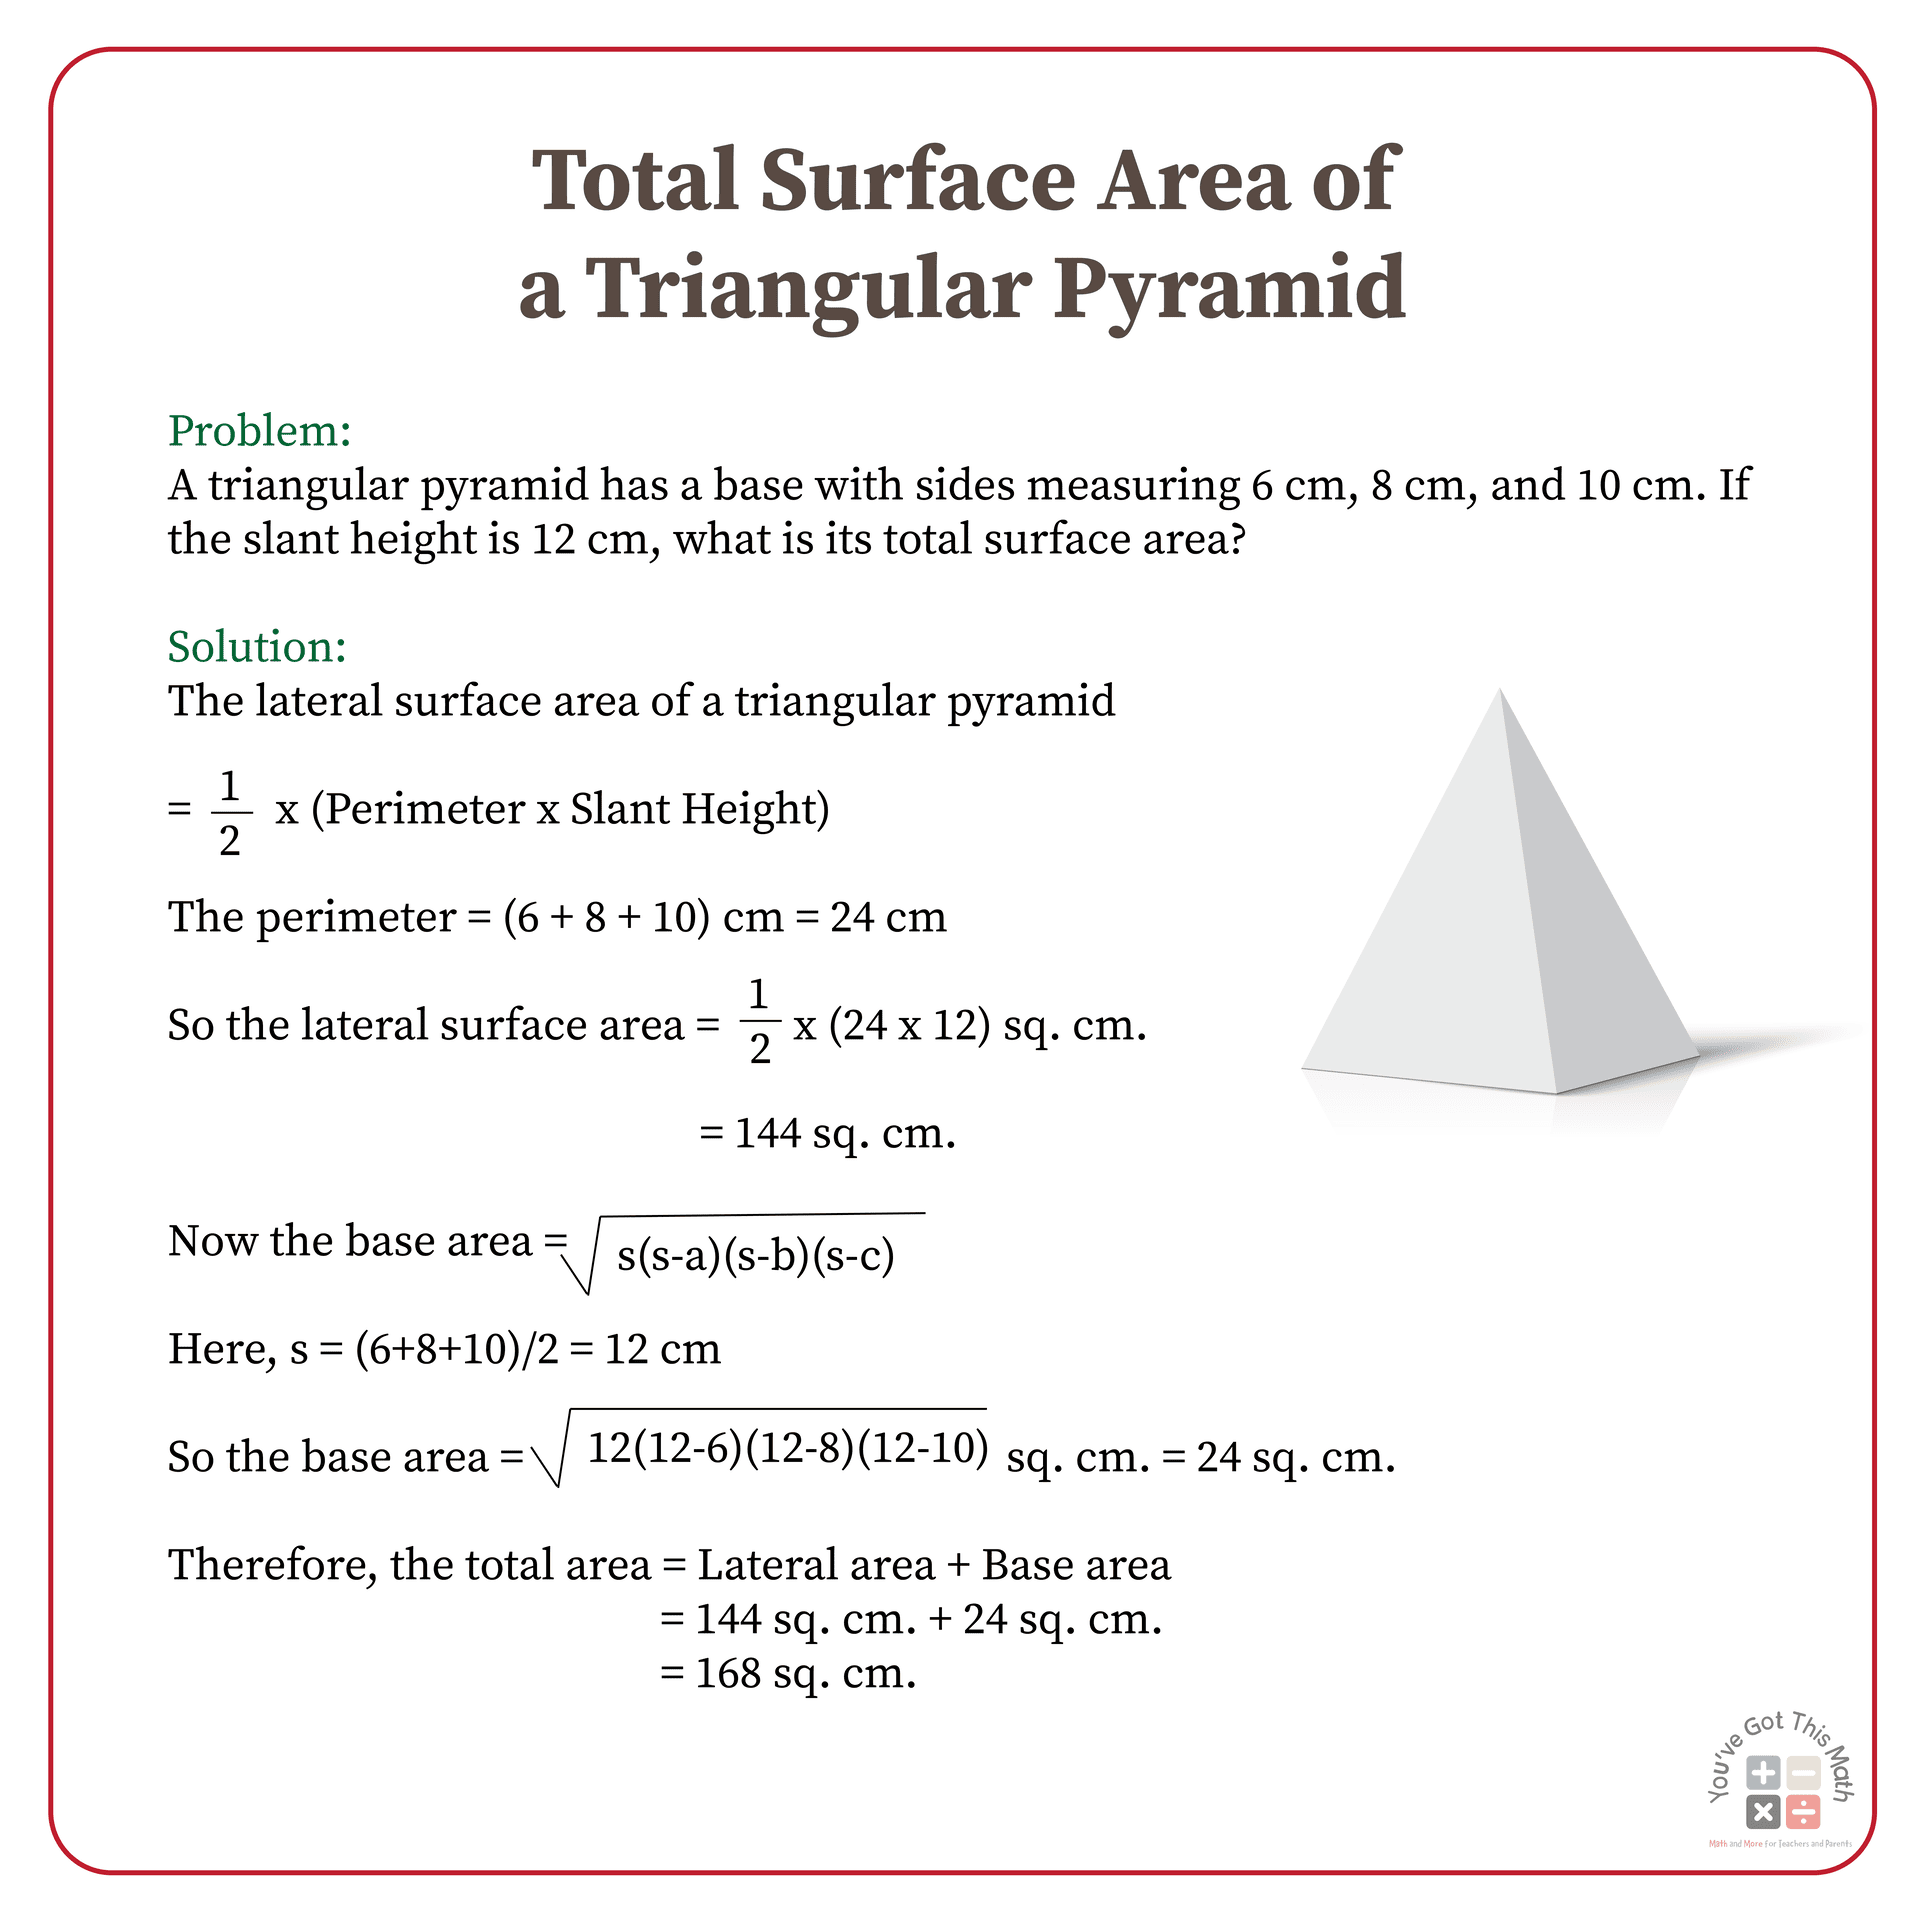 Formula for total surface area of a triangular pyramid